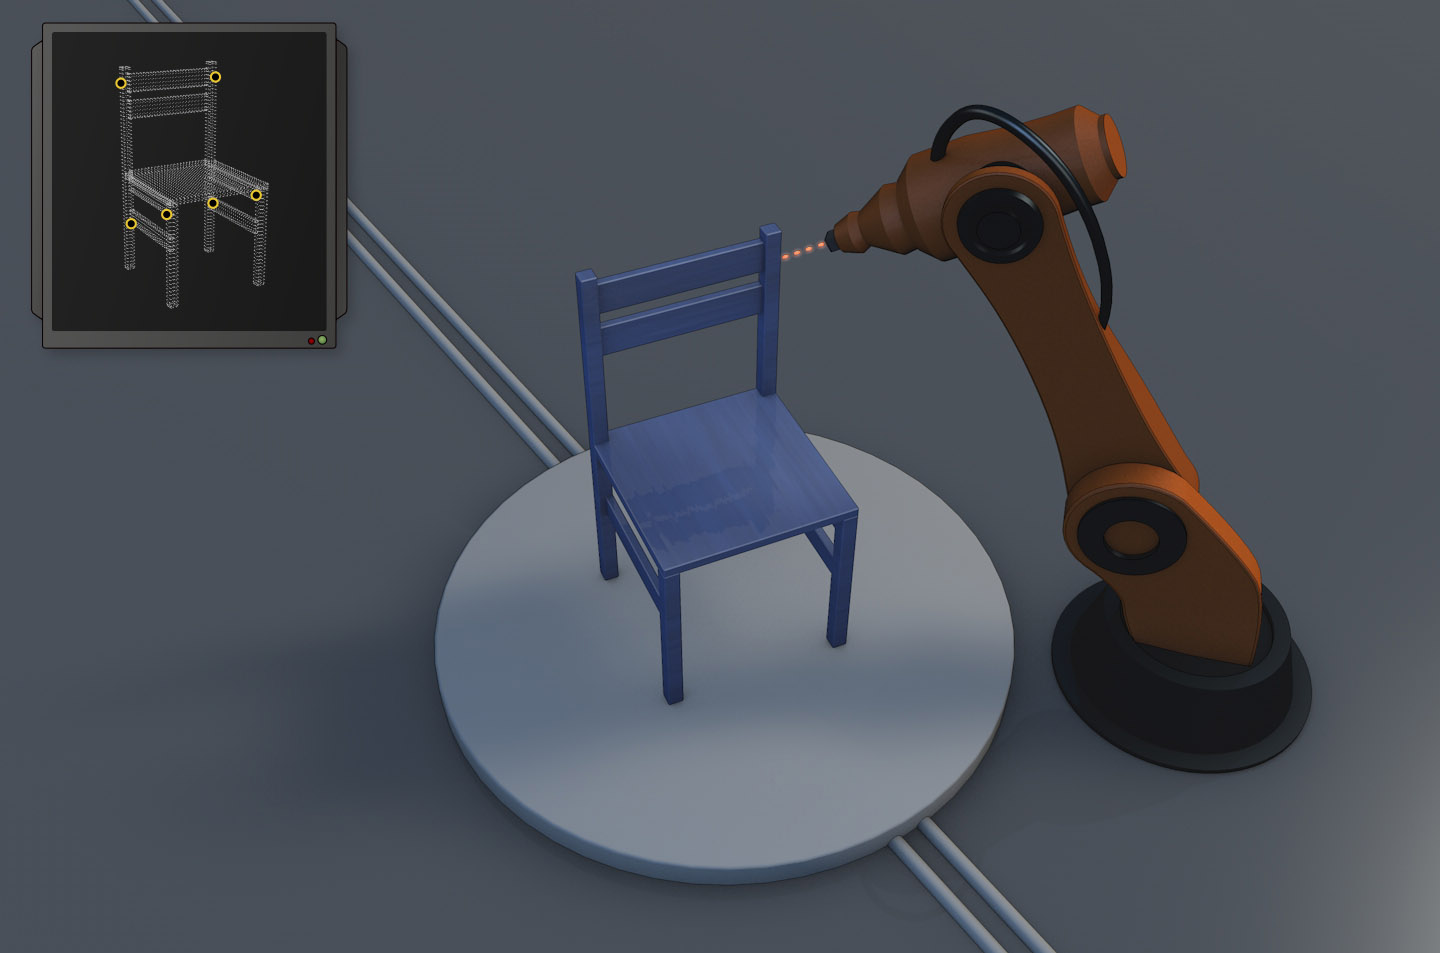 Schematic representation of the measurement process, in this example for a chair.